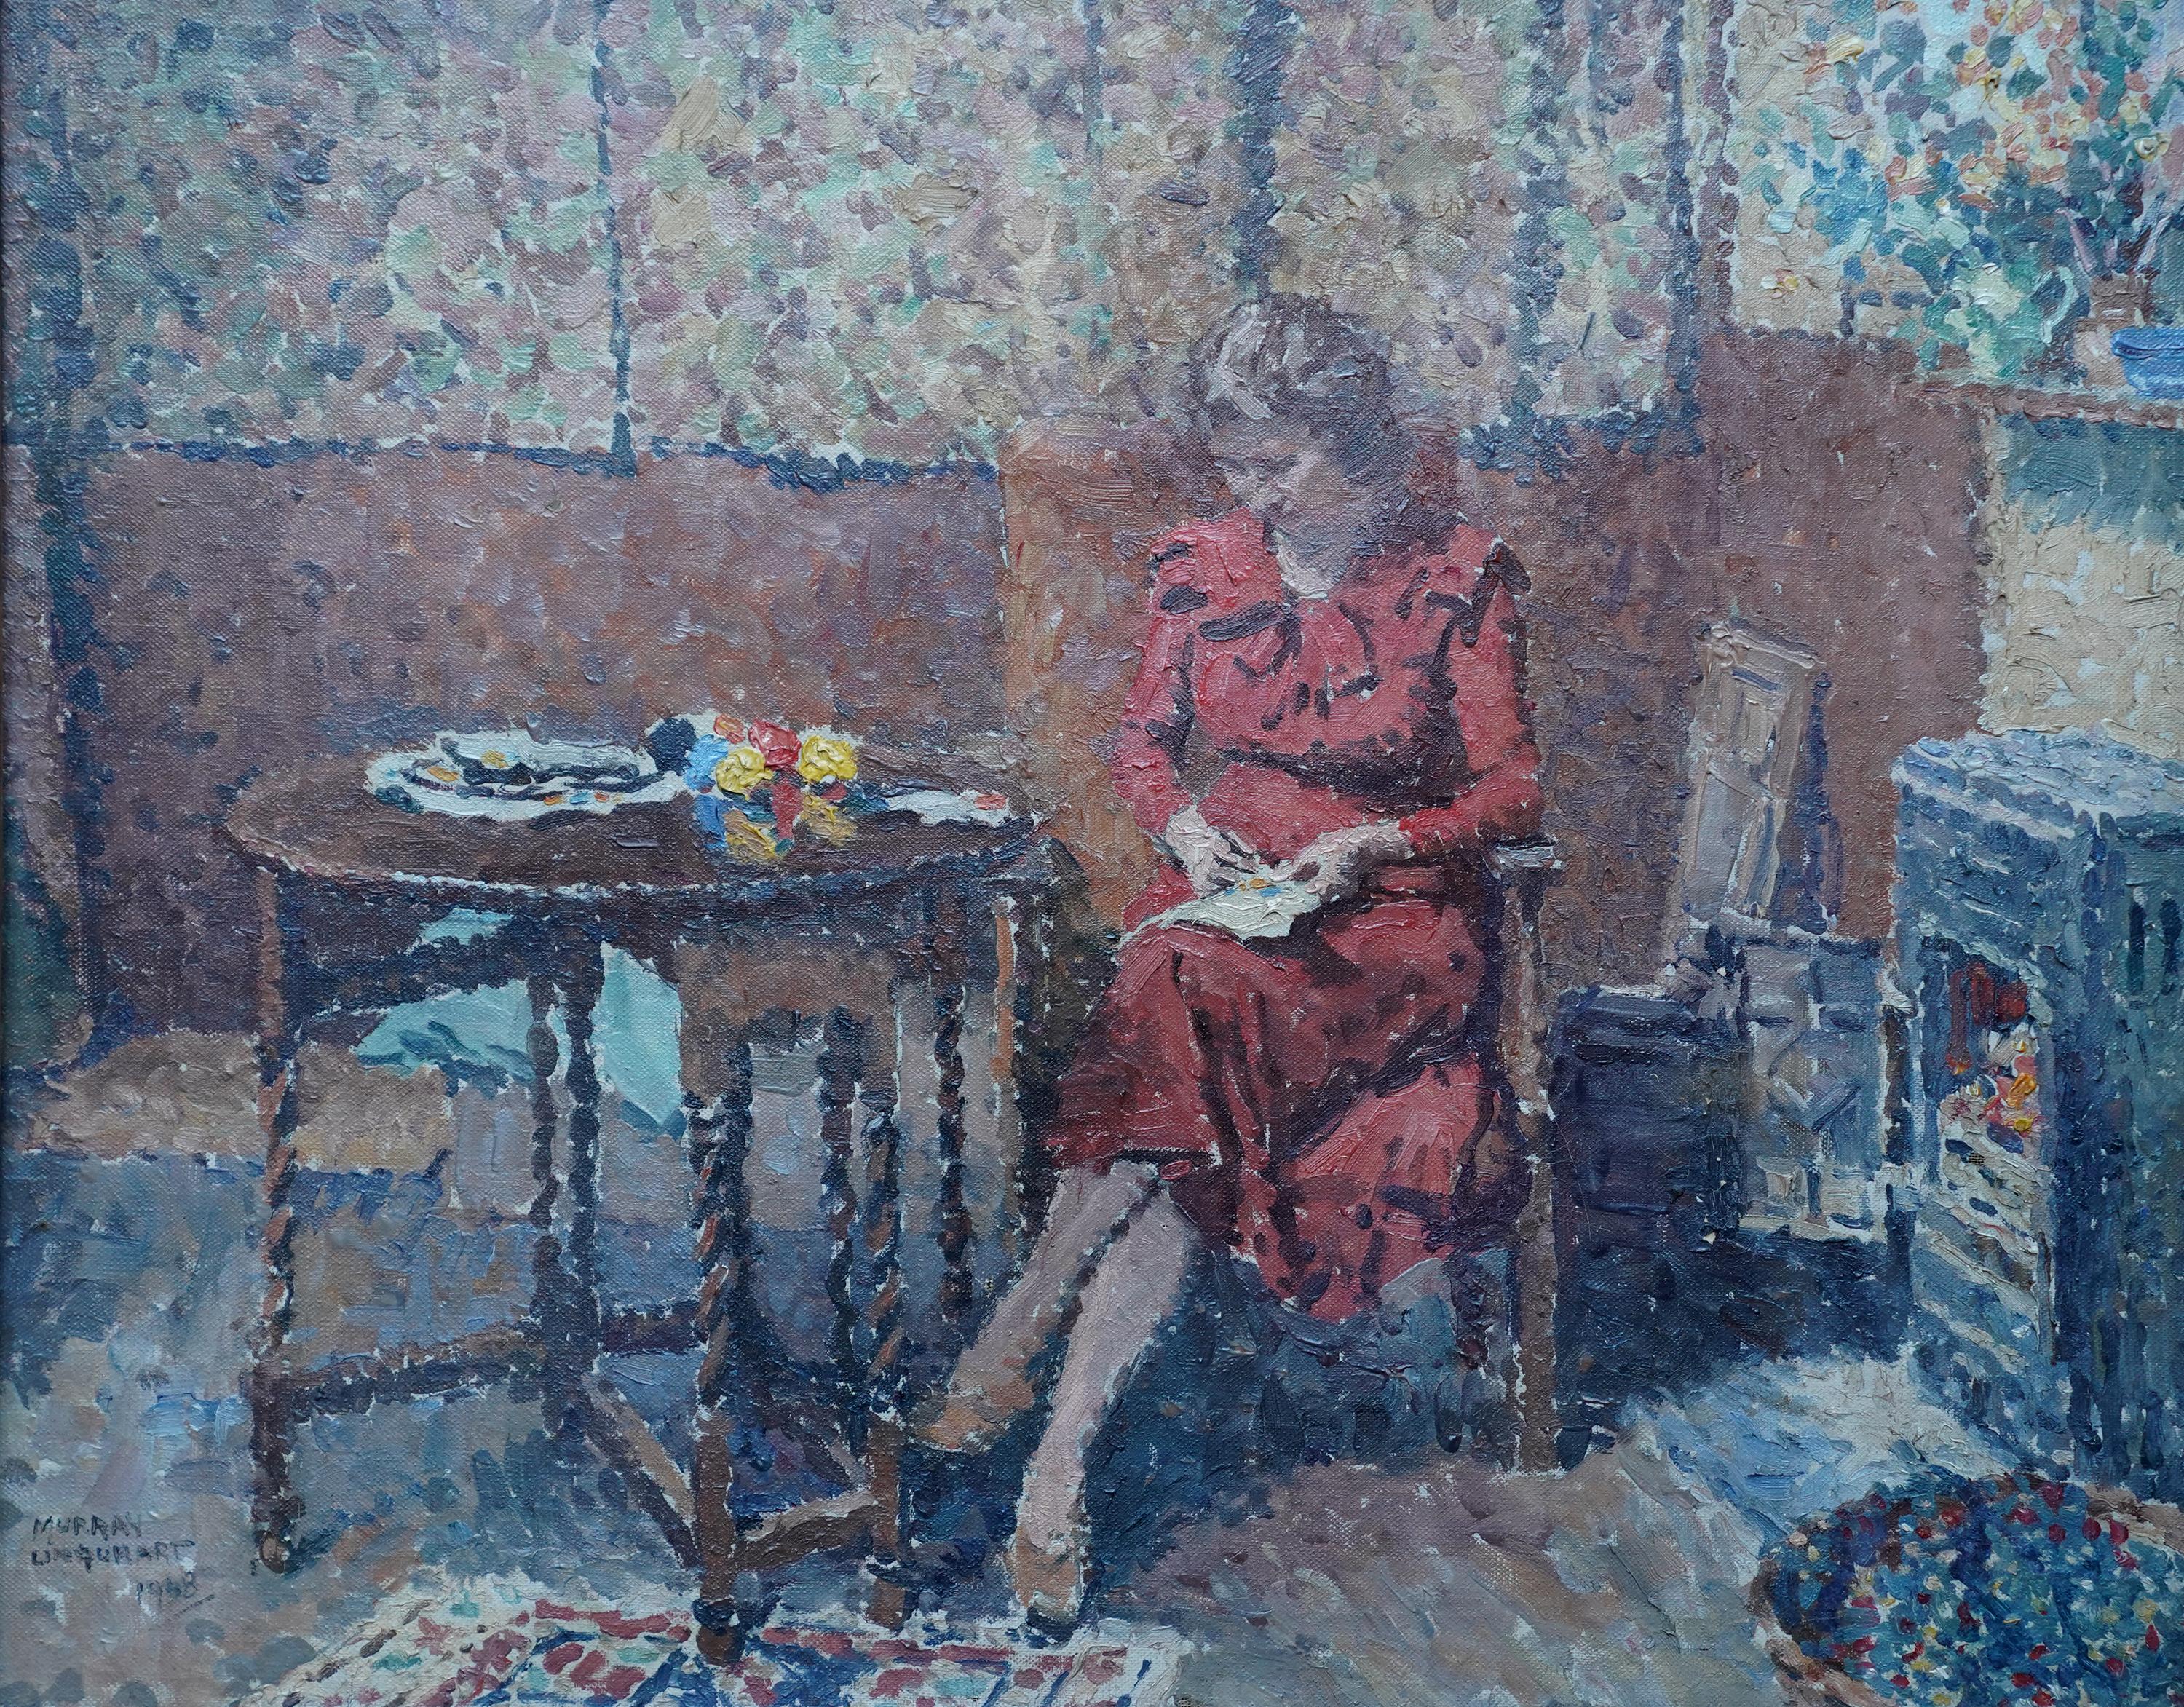 Portrait of Lady Sewing in an Interior - Scottish 40s Pointilliste oil painting - Painting by Murray McNeel Caird Urquhart